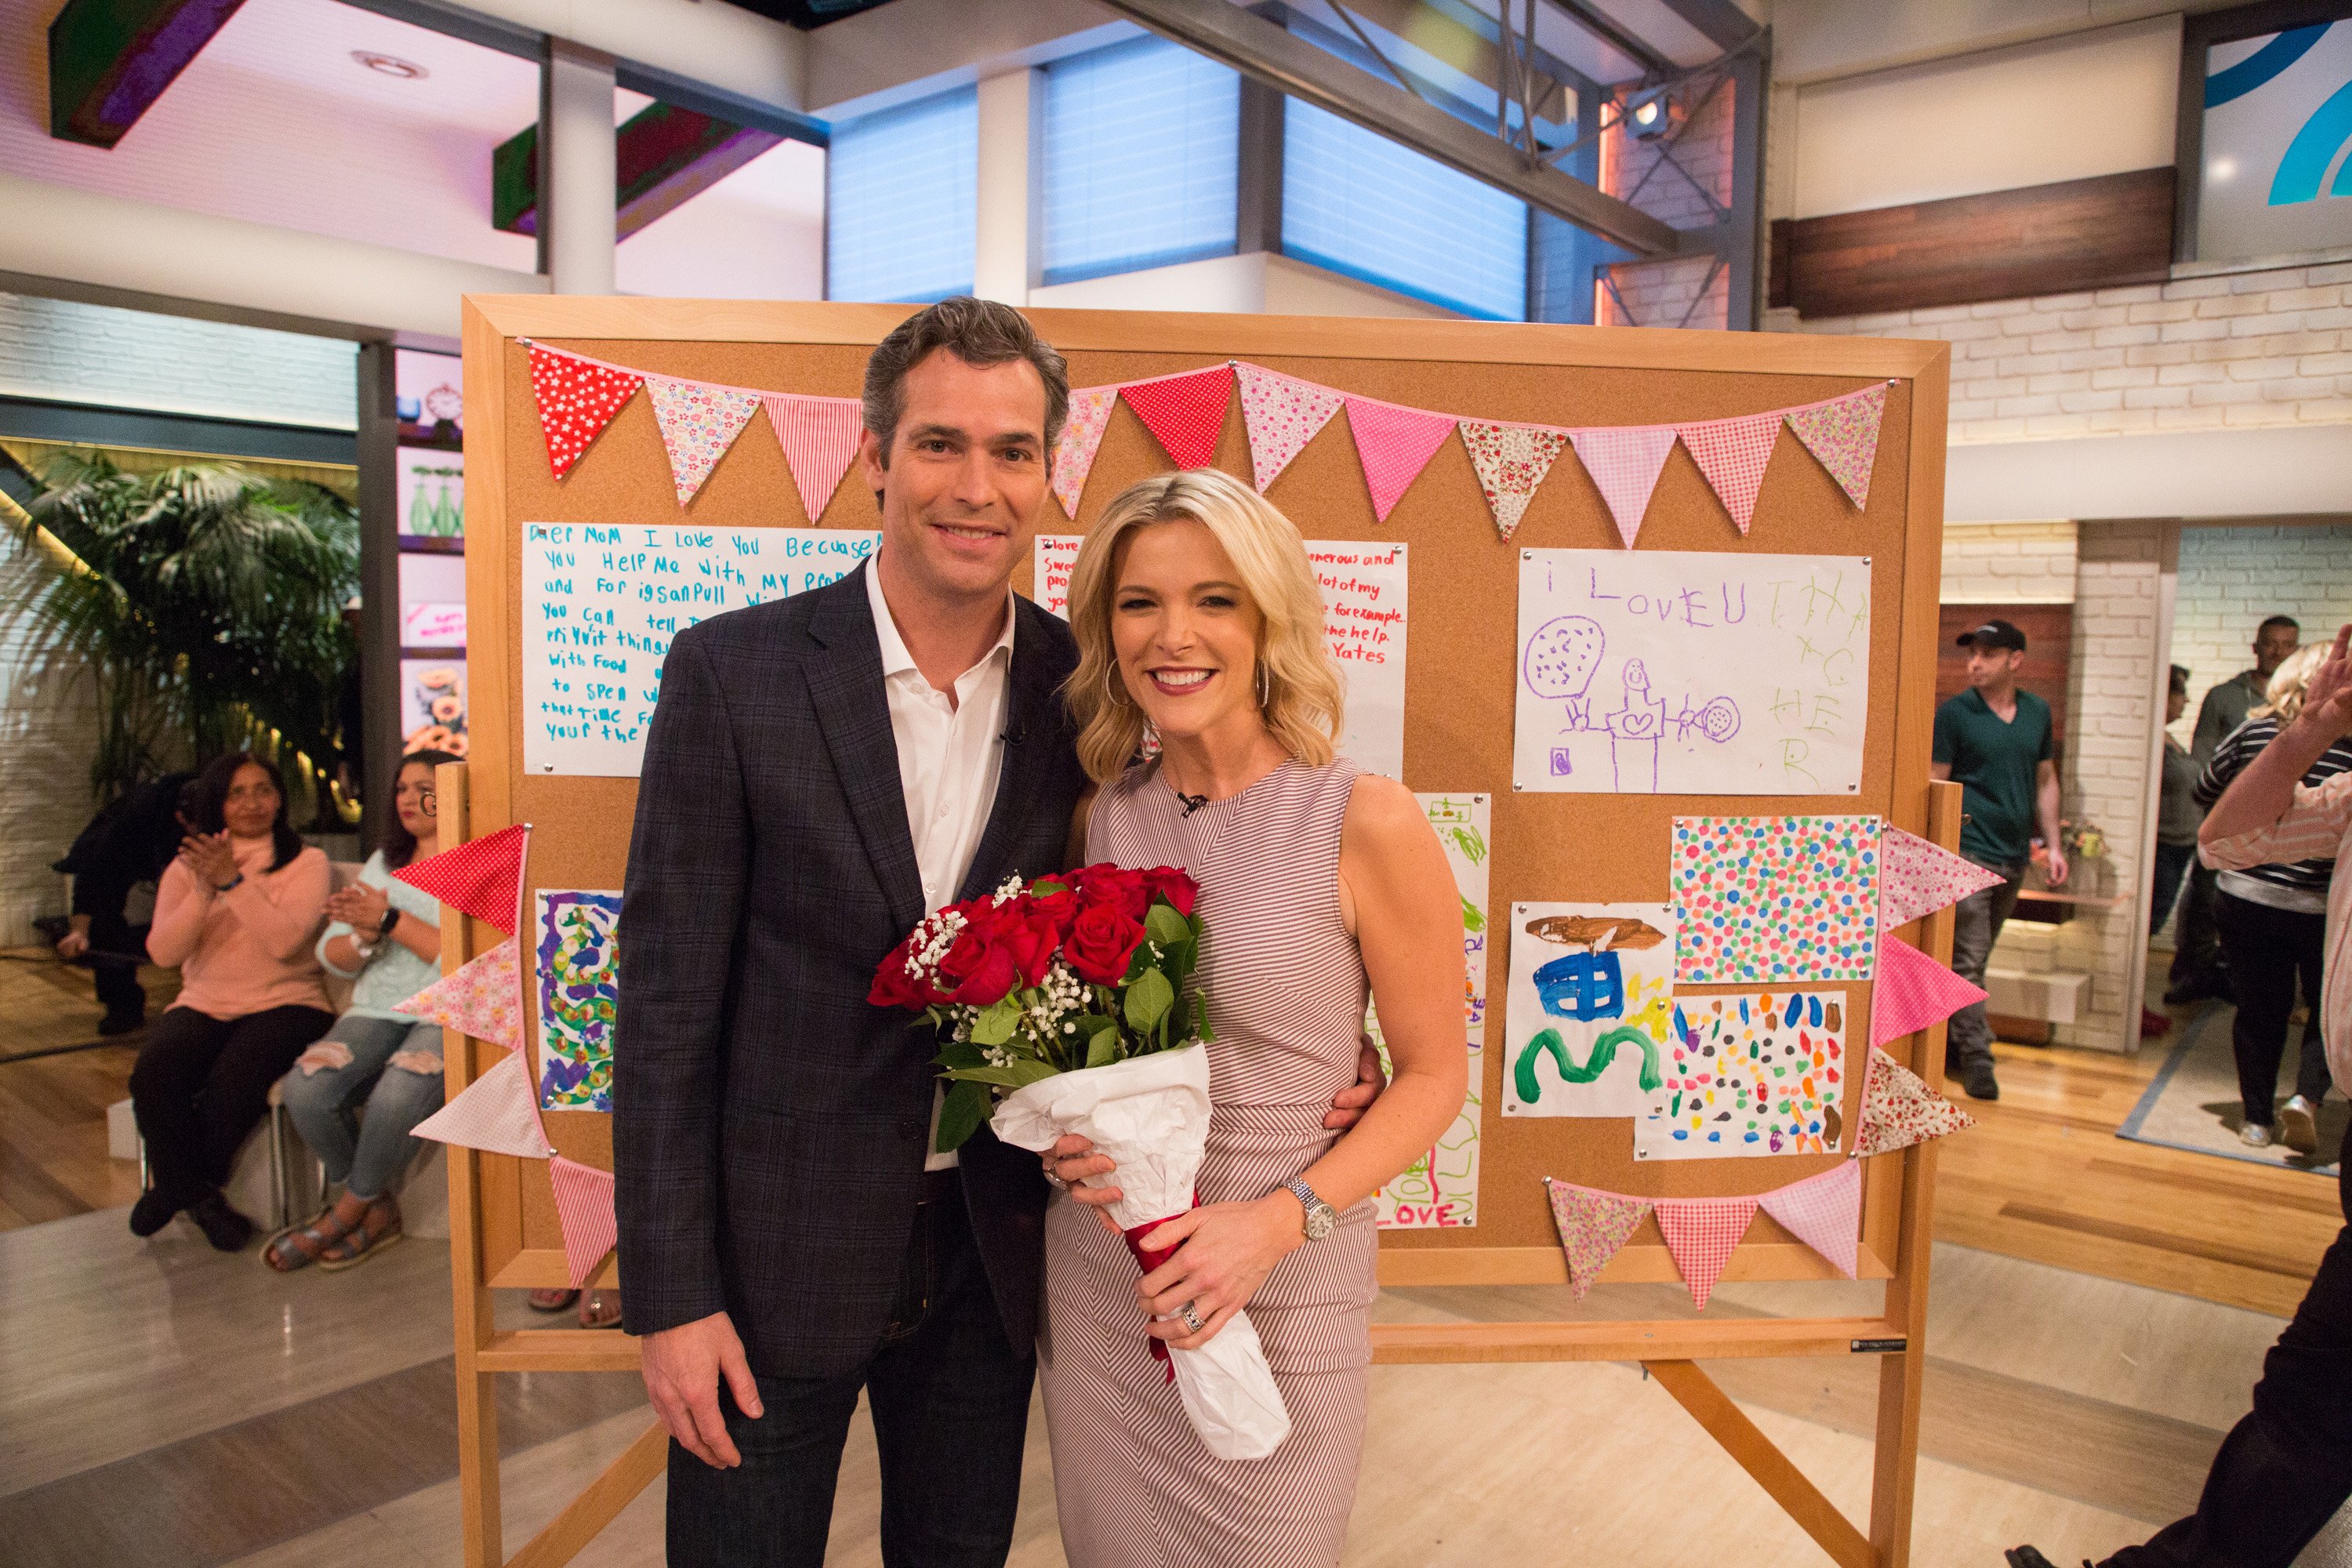 Doug Brunt in a dark jacket standing with wife Megyn Kelly in a gray dress holding a bouquet of flowers